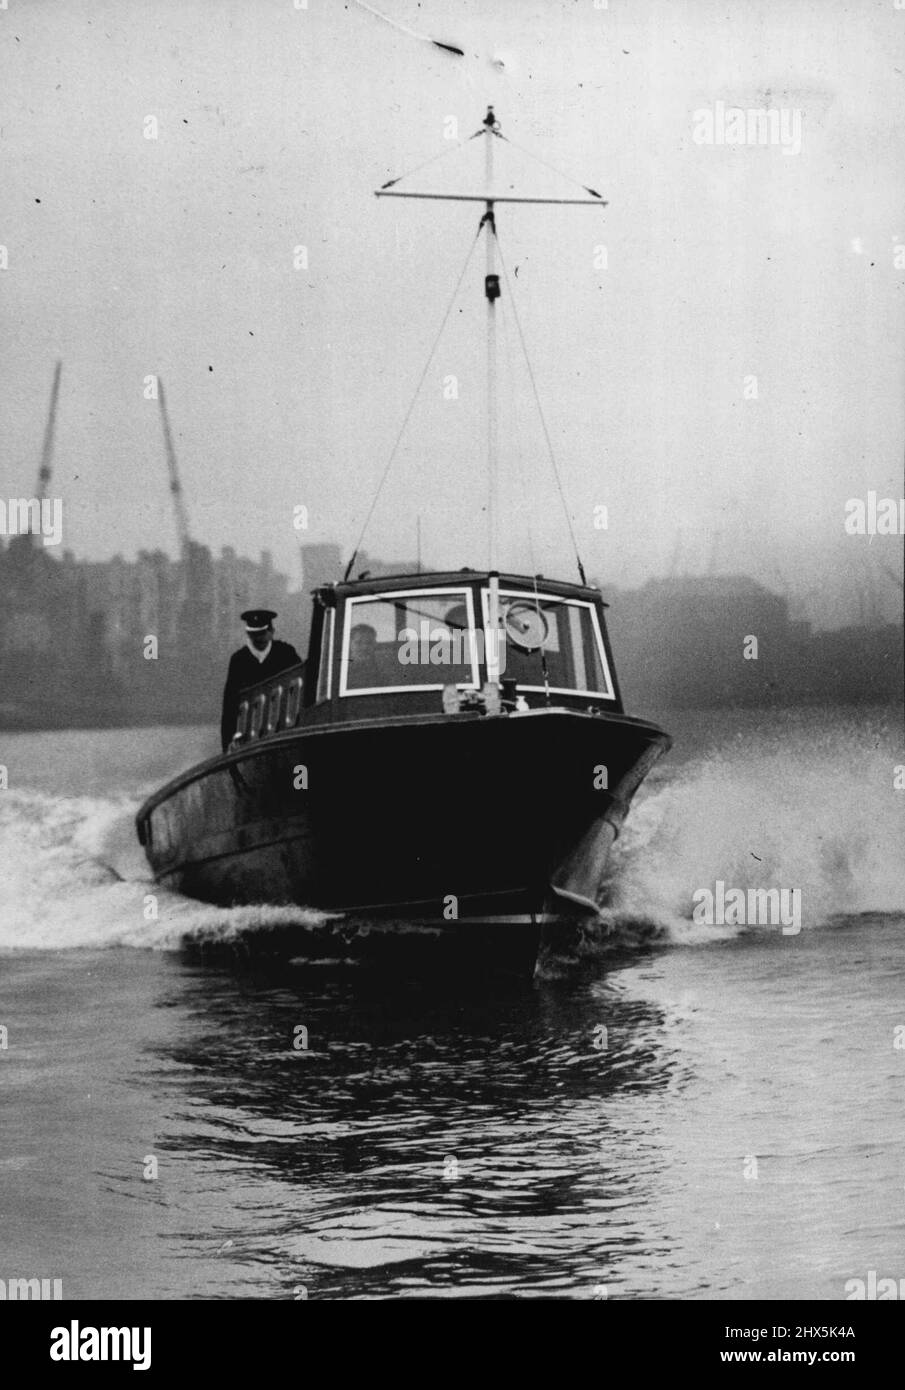 River Police Get Fast New Boats From The R.A.F. One of the new Thames River Police craft traveling at high speed during a trial run on the River Thames, London. The first of three new high-speed craft for the Thames River Police has been launched of the River Thames in London. The boats are forty-feet long ex-Roayl Air Force seaplane tenders adapted for their new role. Each is Fitted with two 100-horsepower Diesel engines, and twin screws - giving a speed of twenty-two knots and is equipped with two-way radio and searchlight. March 14, 1947. Stock Photo